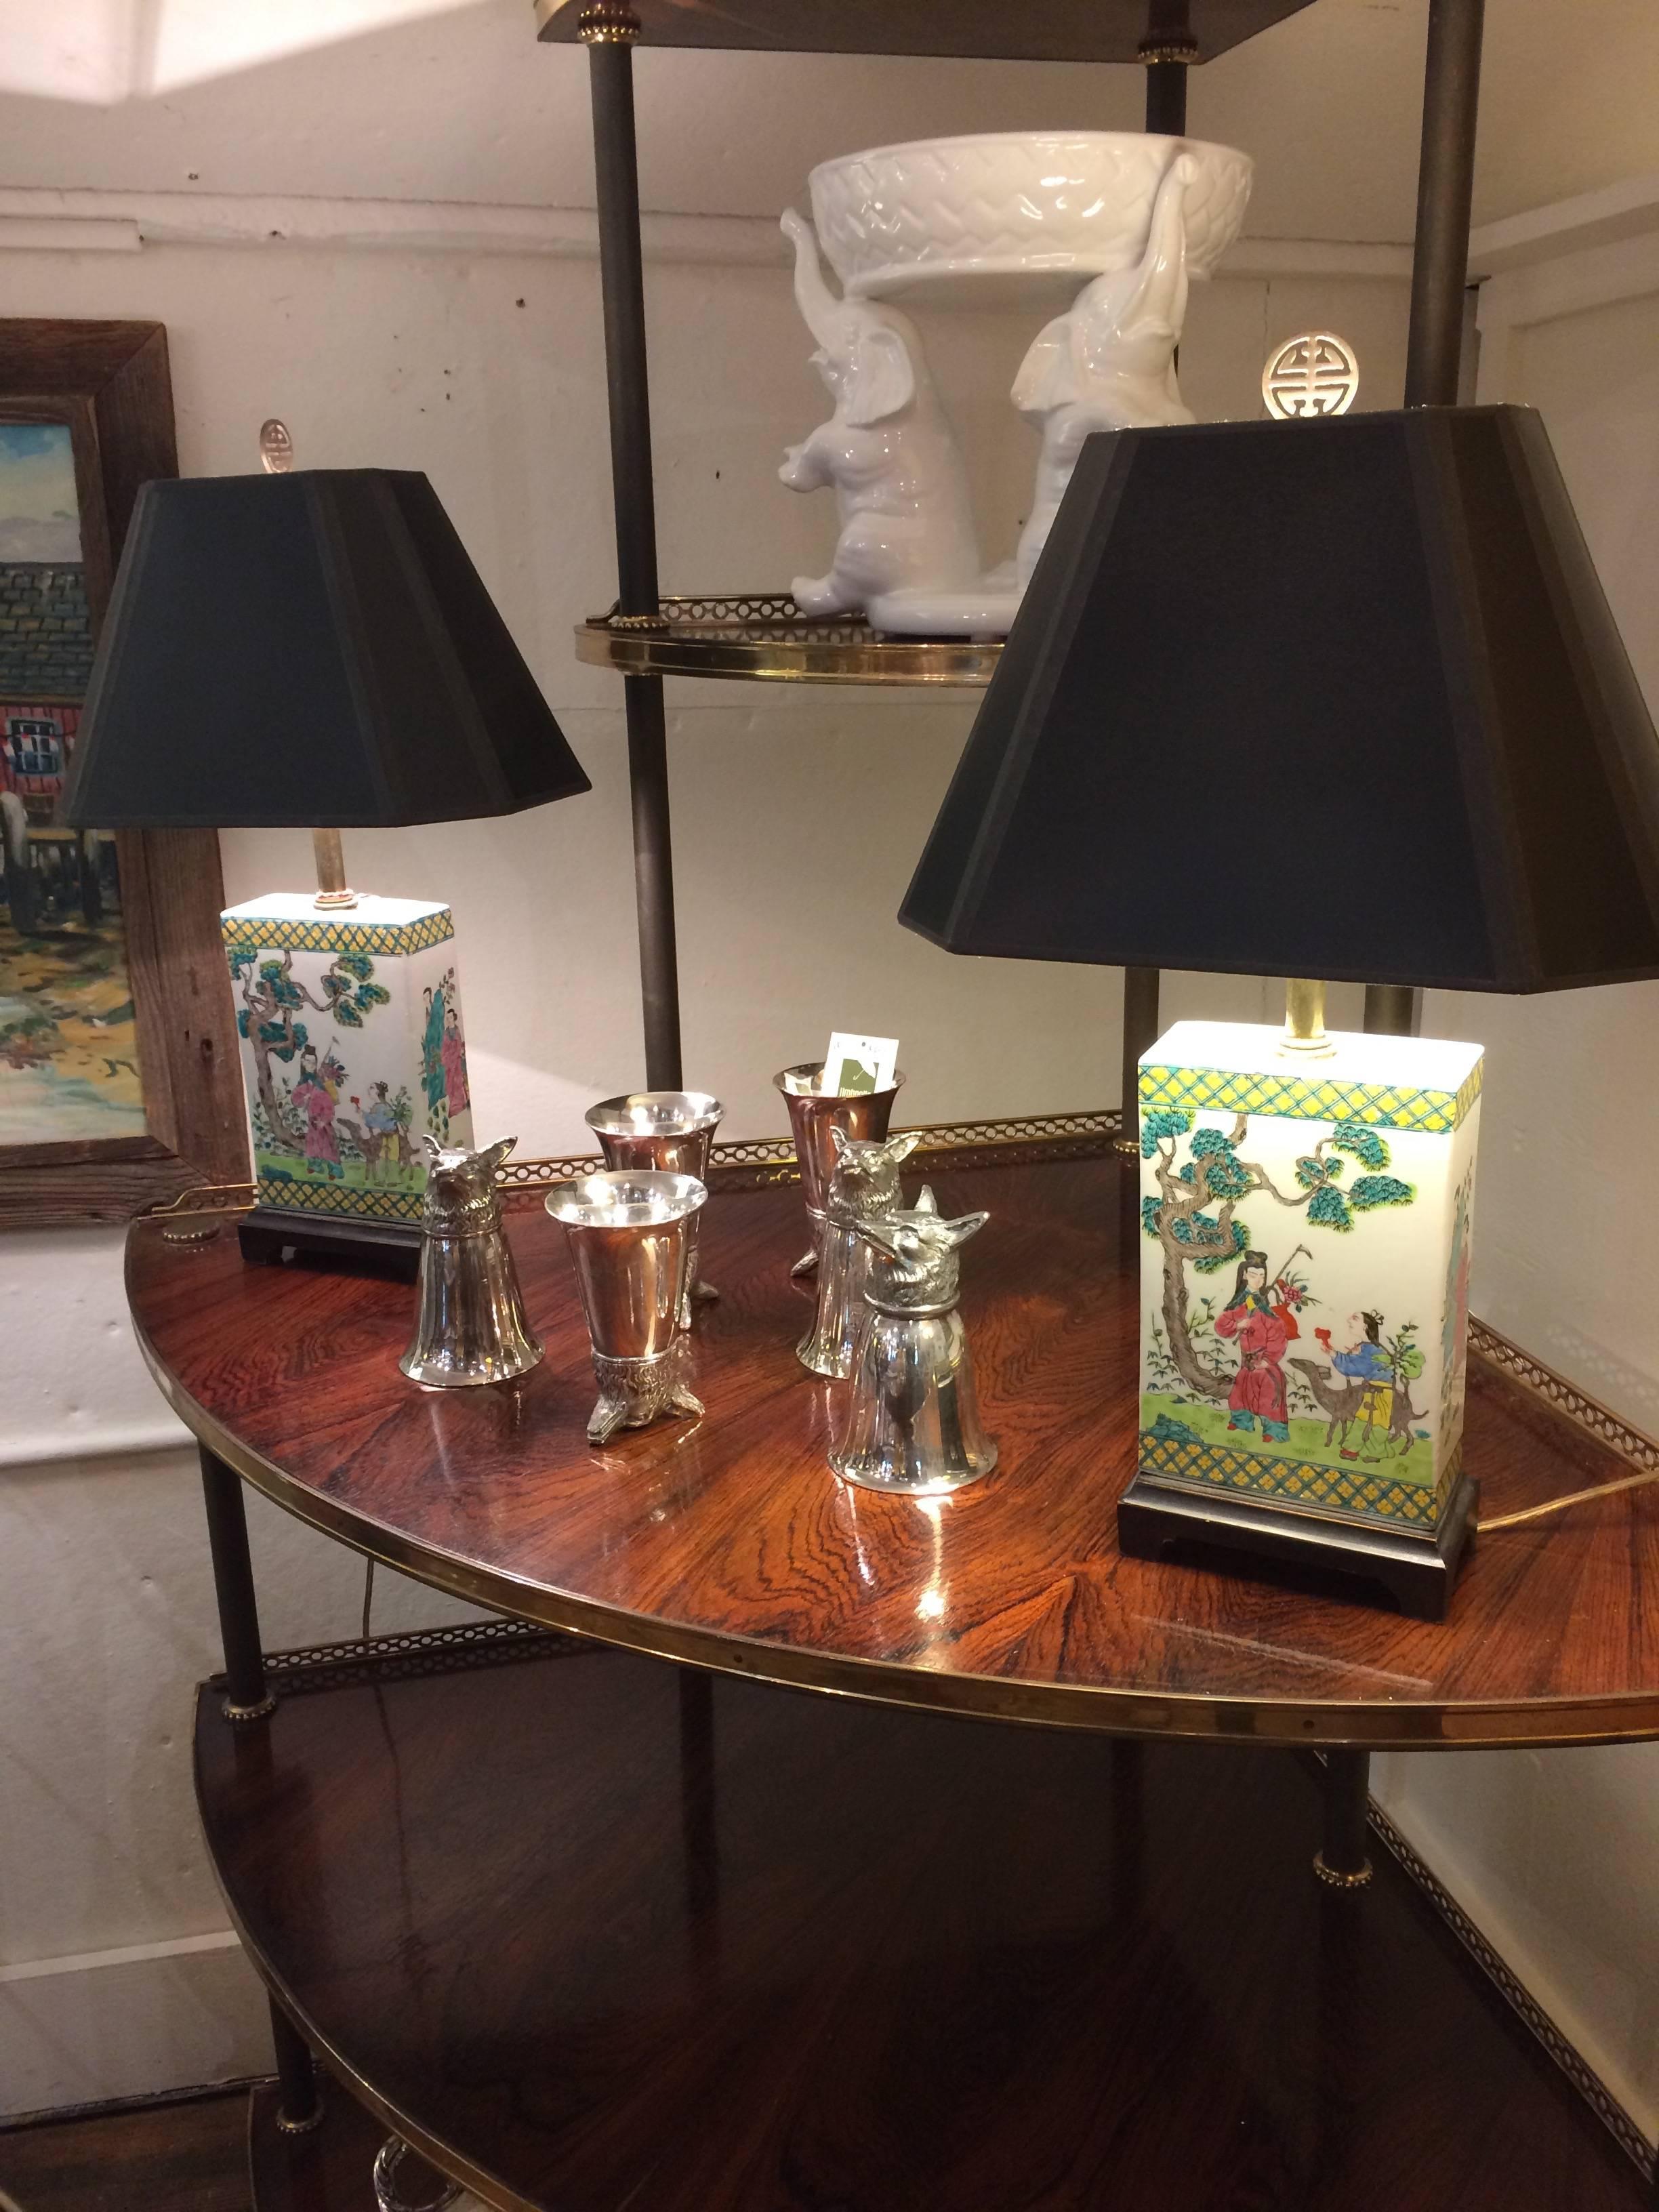 Two rectangular shaped porcelain hand-painted lamps having gorgeous figural scenes in a jewel toned color palette of soft green, pink and cream, on dark wood stands with custom black shades.
Porcelain part of lamp with bases measure 5.75 W x 3.25 D